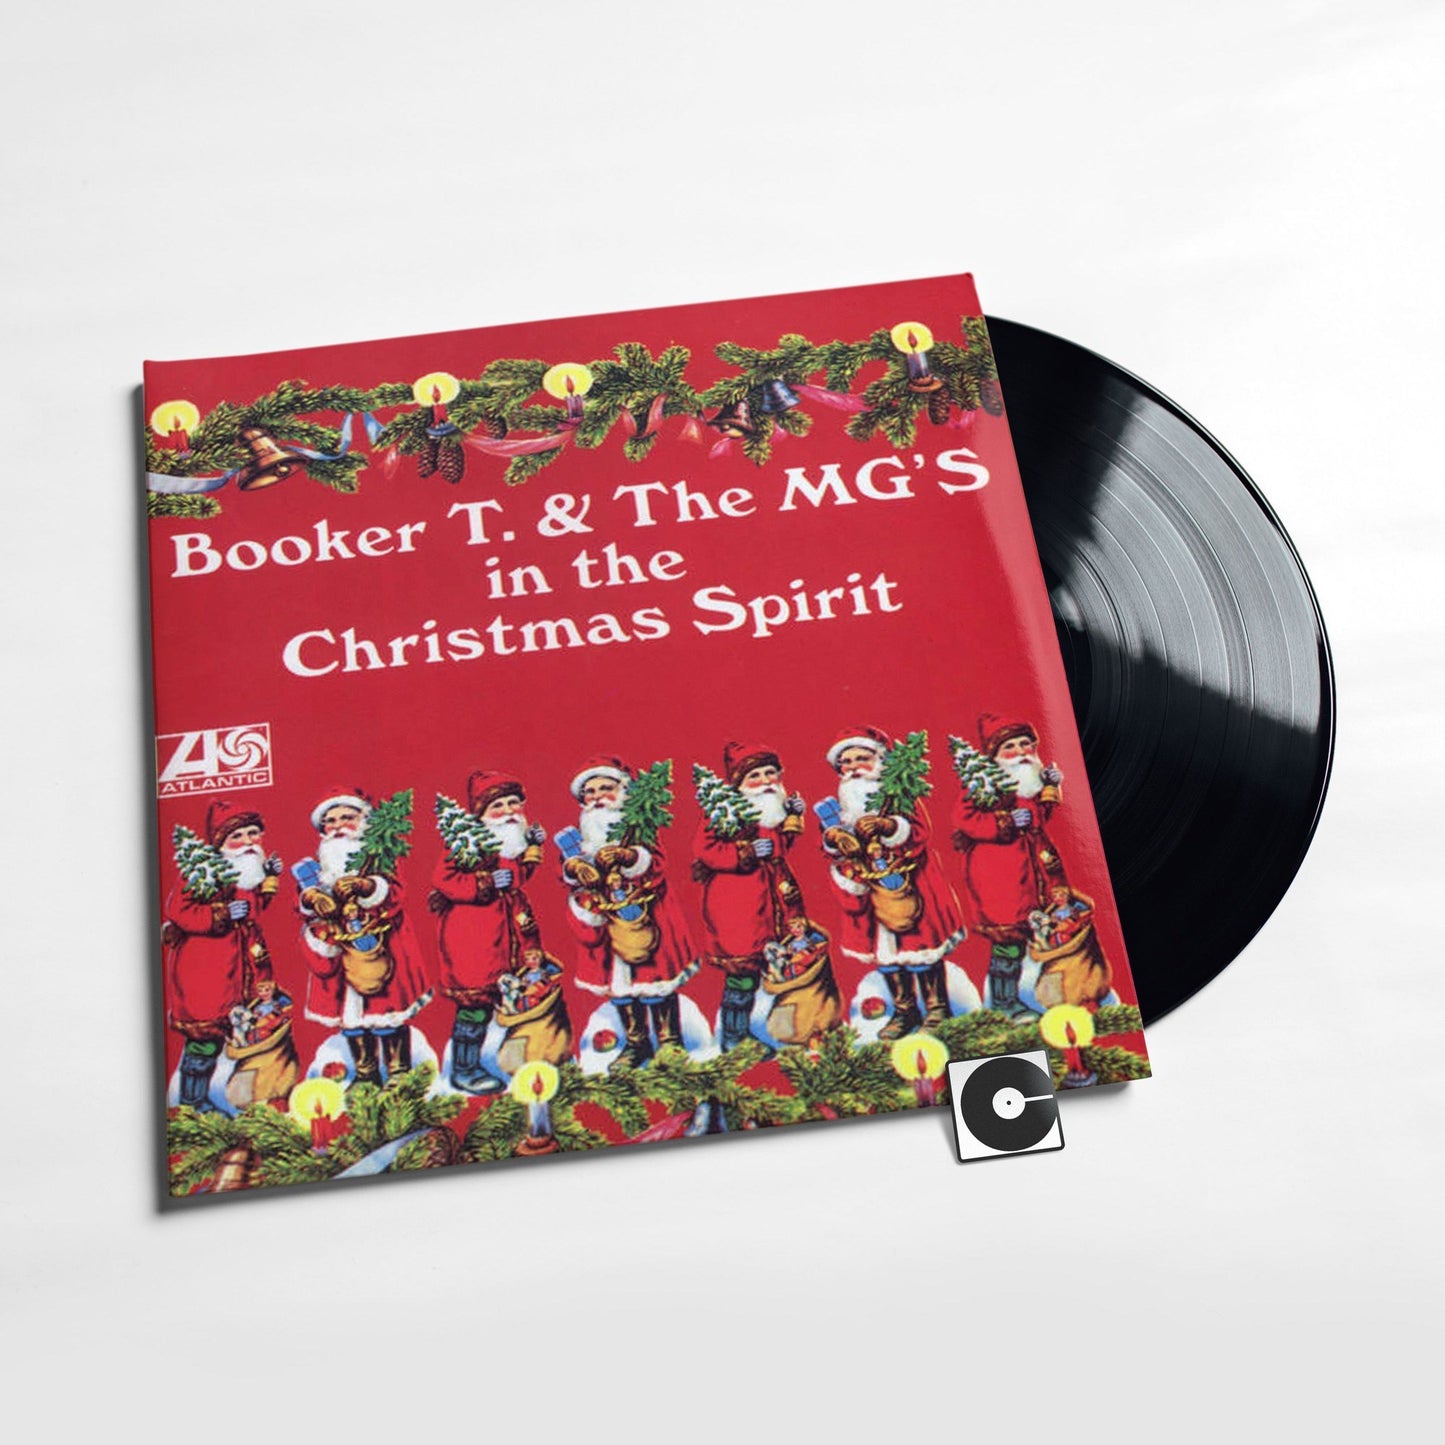 Booker T. & The MG's - "In The Christmas Spirit"